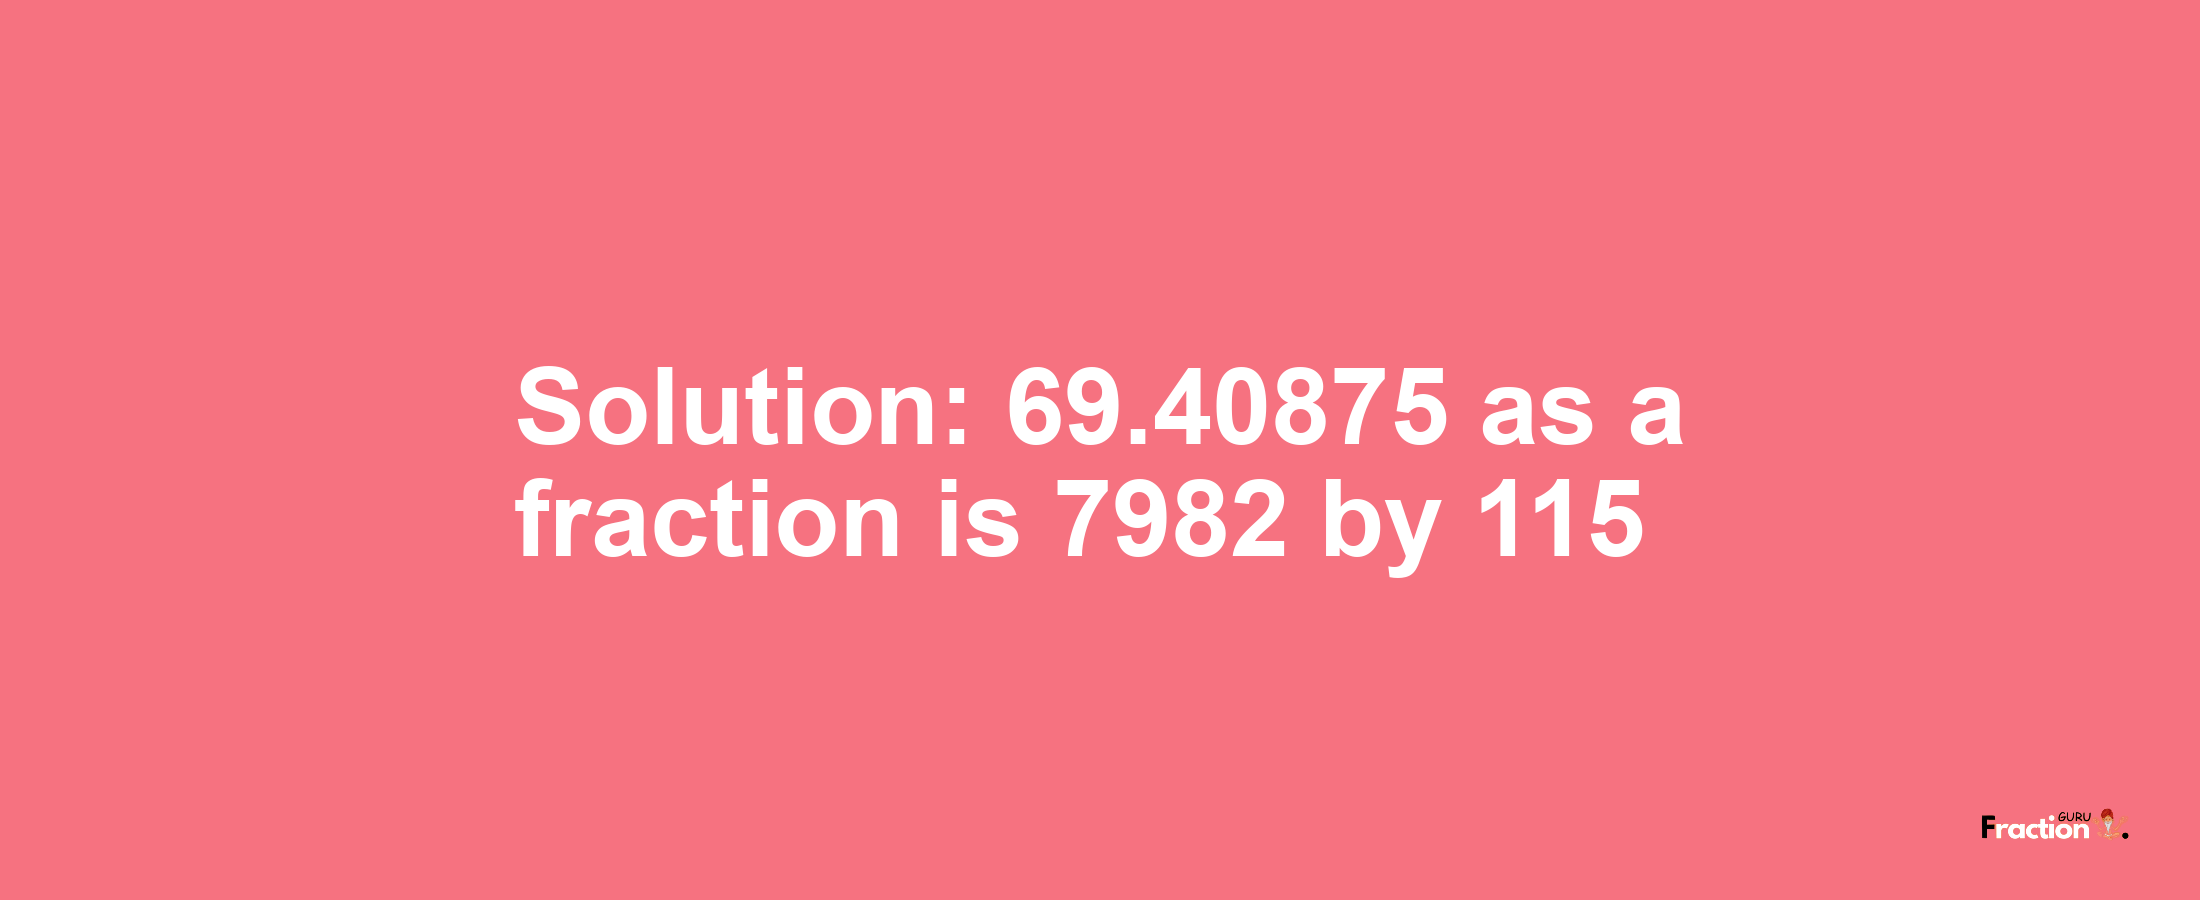 Solution:69.40875 as a fraction is 7982/115